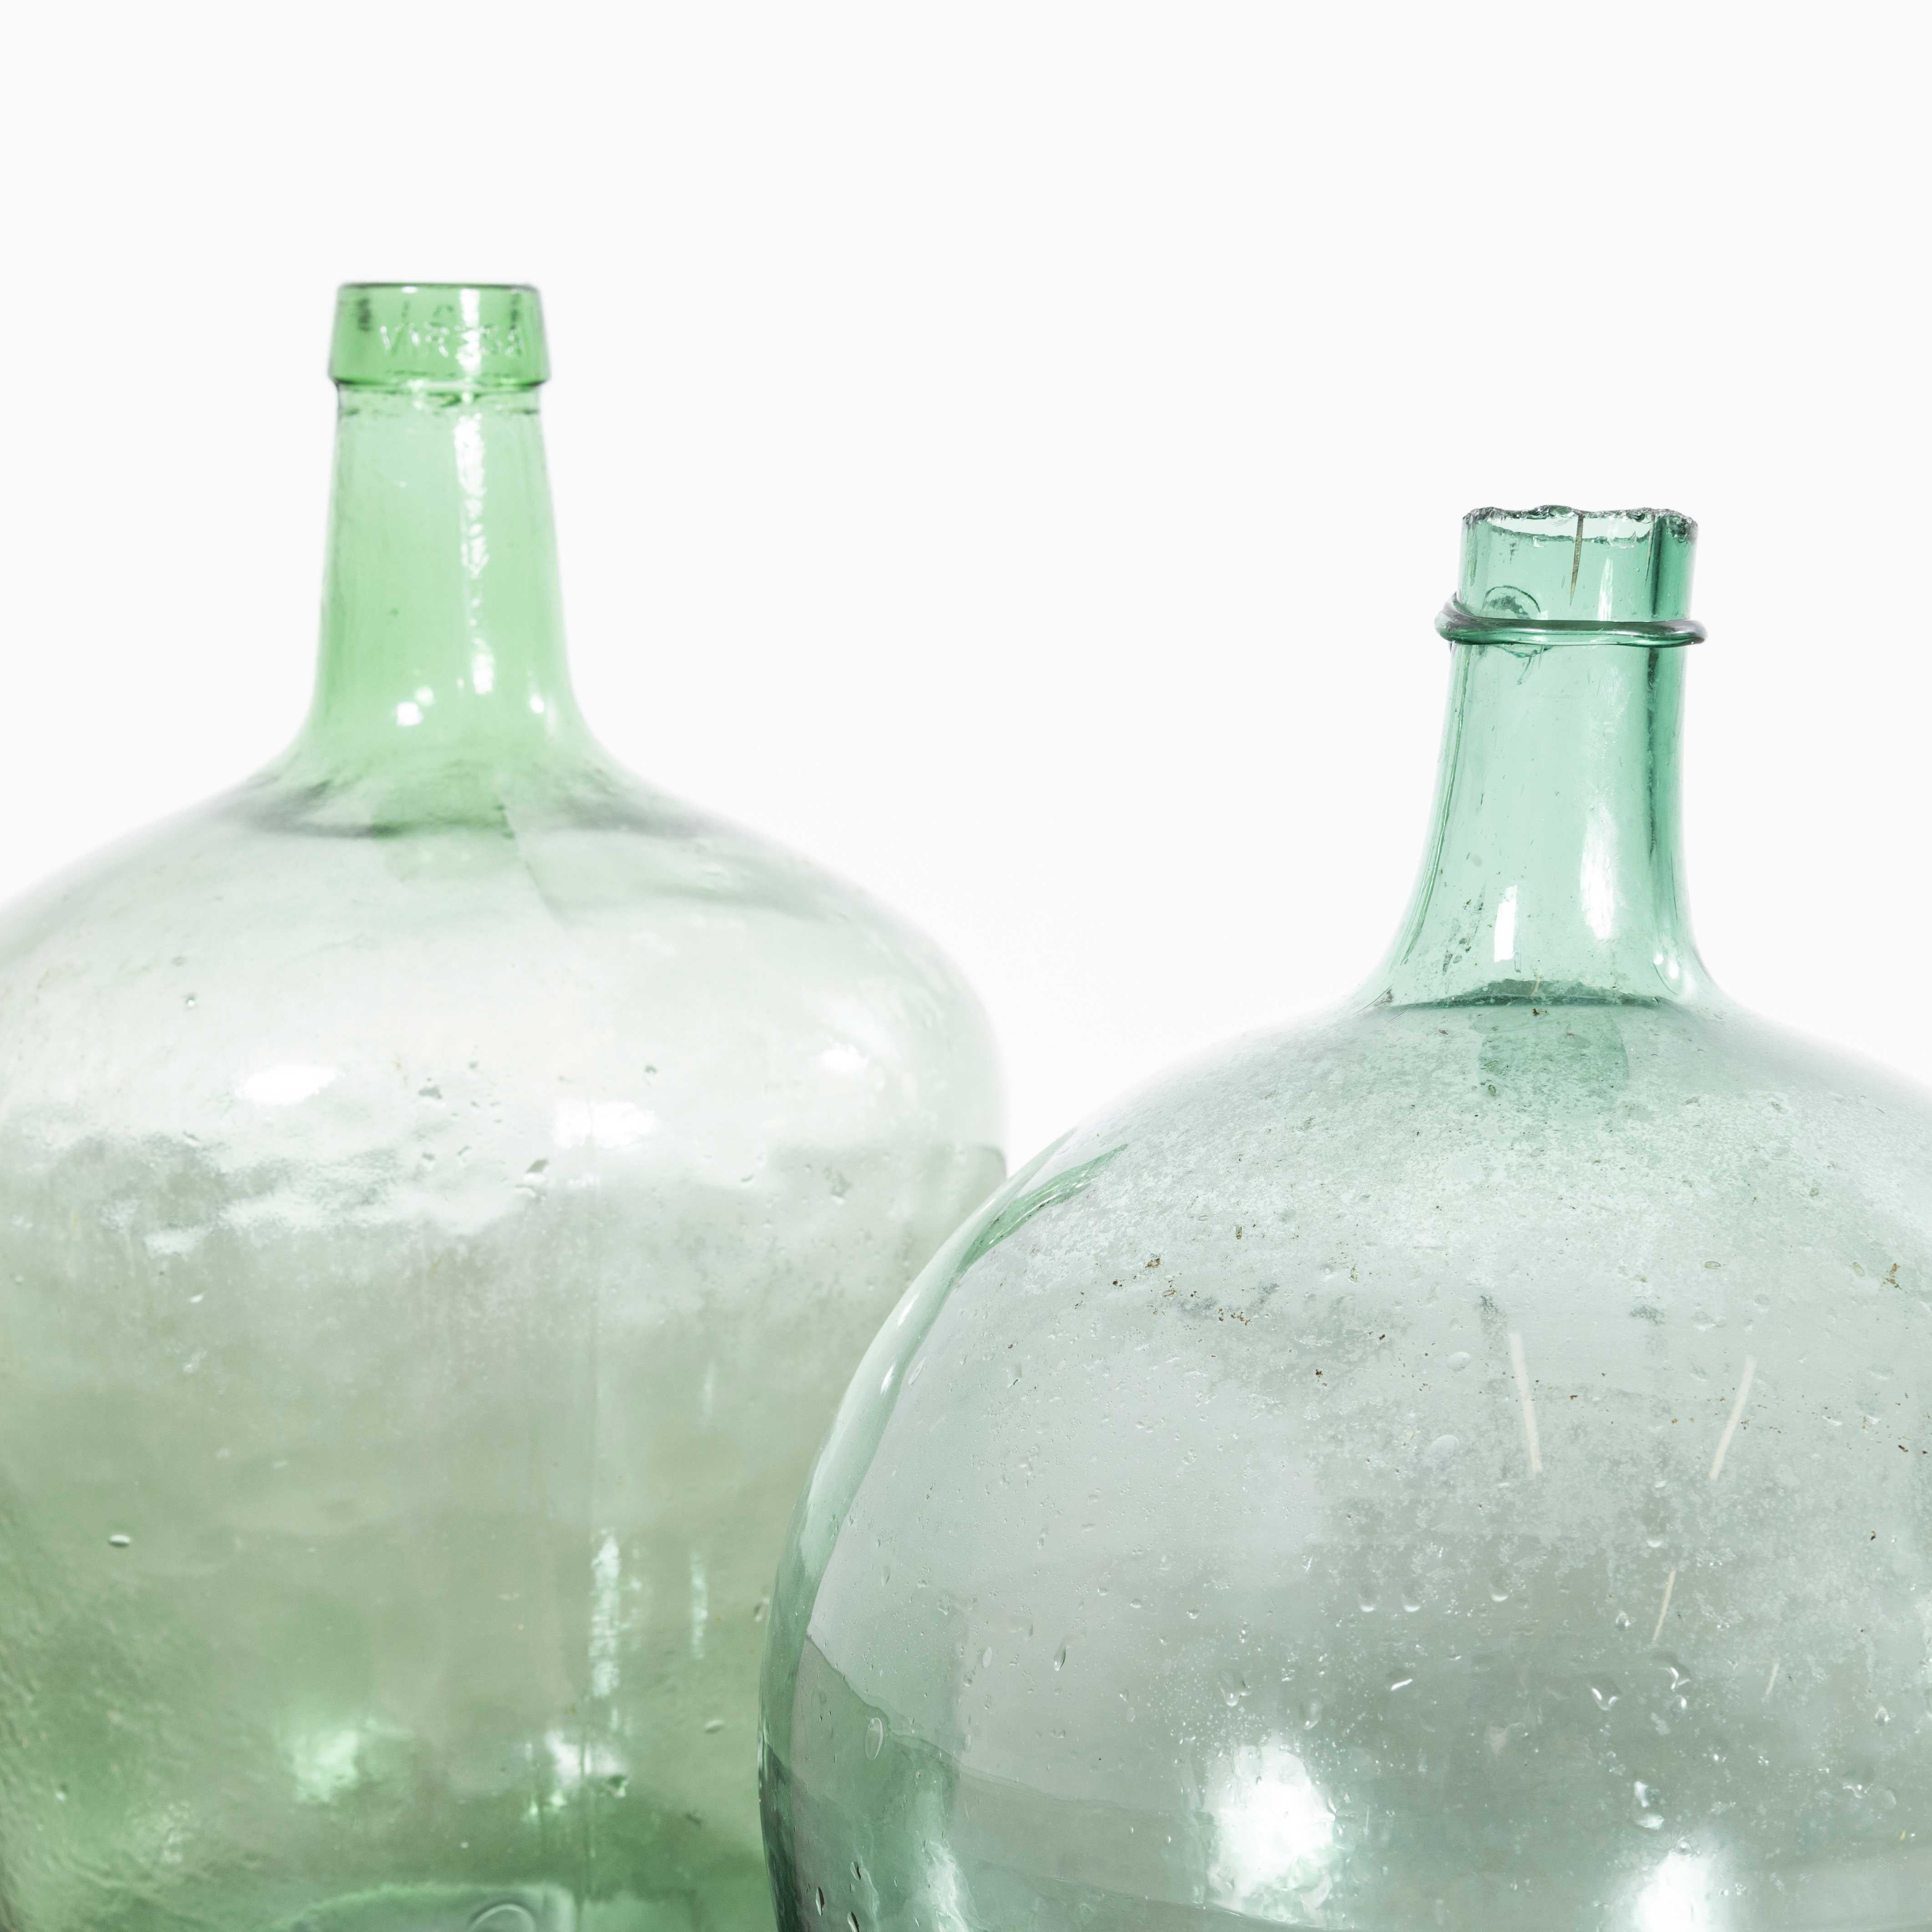 Vintage French Glass Demijohns – Pair (957.23)
Vintage French Glass Demijohns – Pair. A pair of mouth blown glass demijohns used as a traditional containers mainly for wine storage and transport. These demijohns have been carefully cleaned.